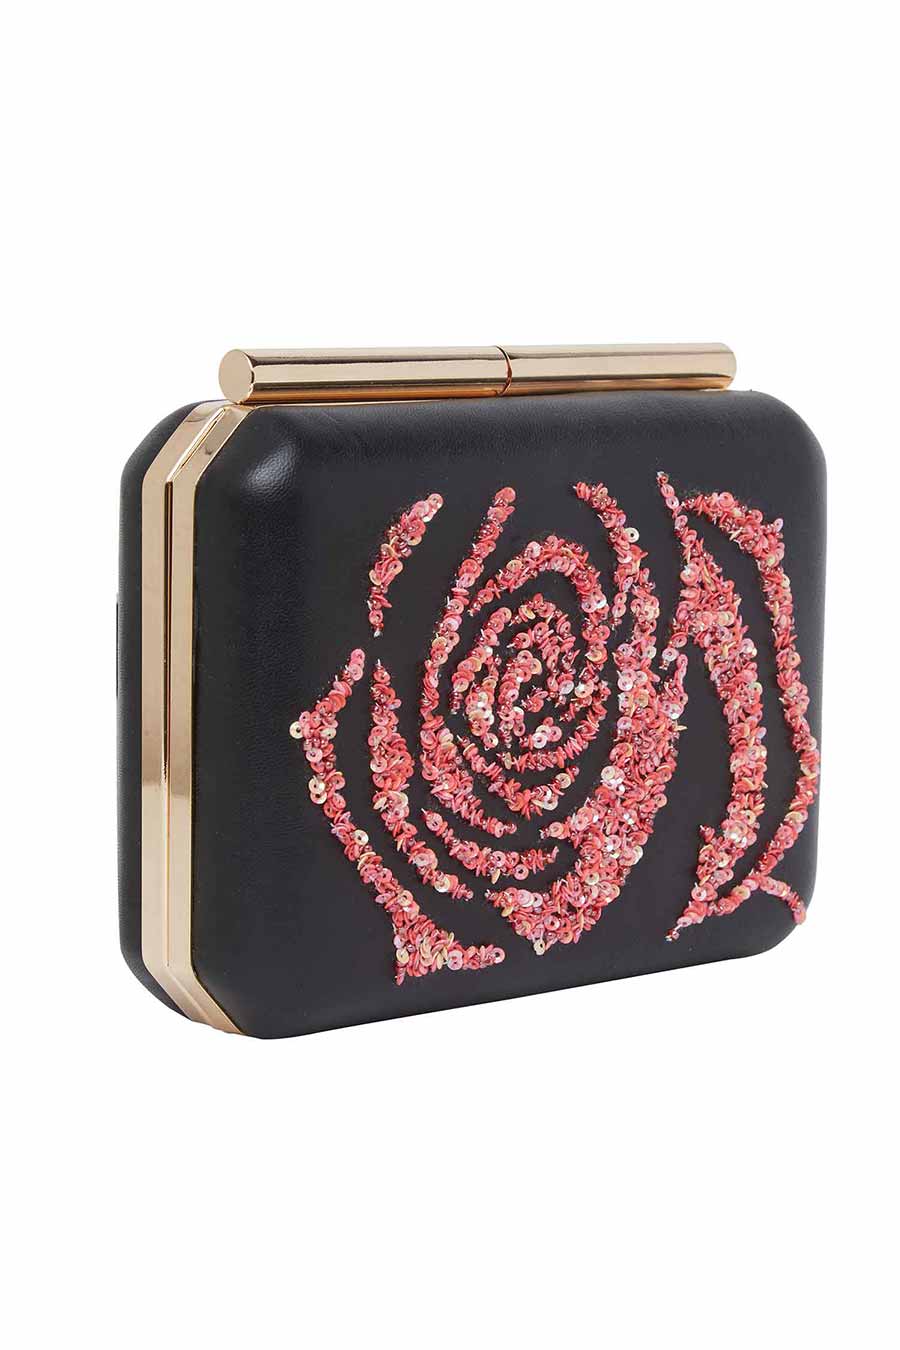 Black Leather Clutch With Pink Rose